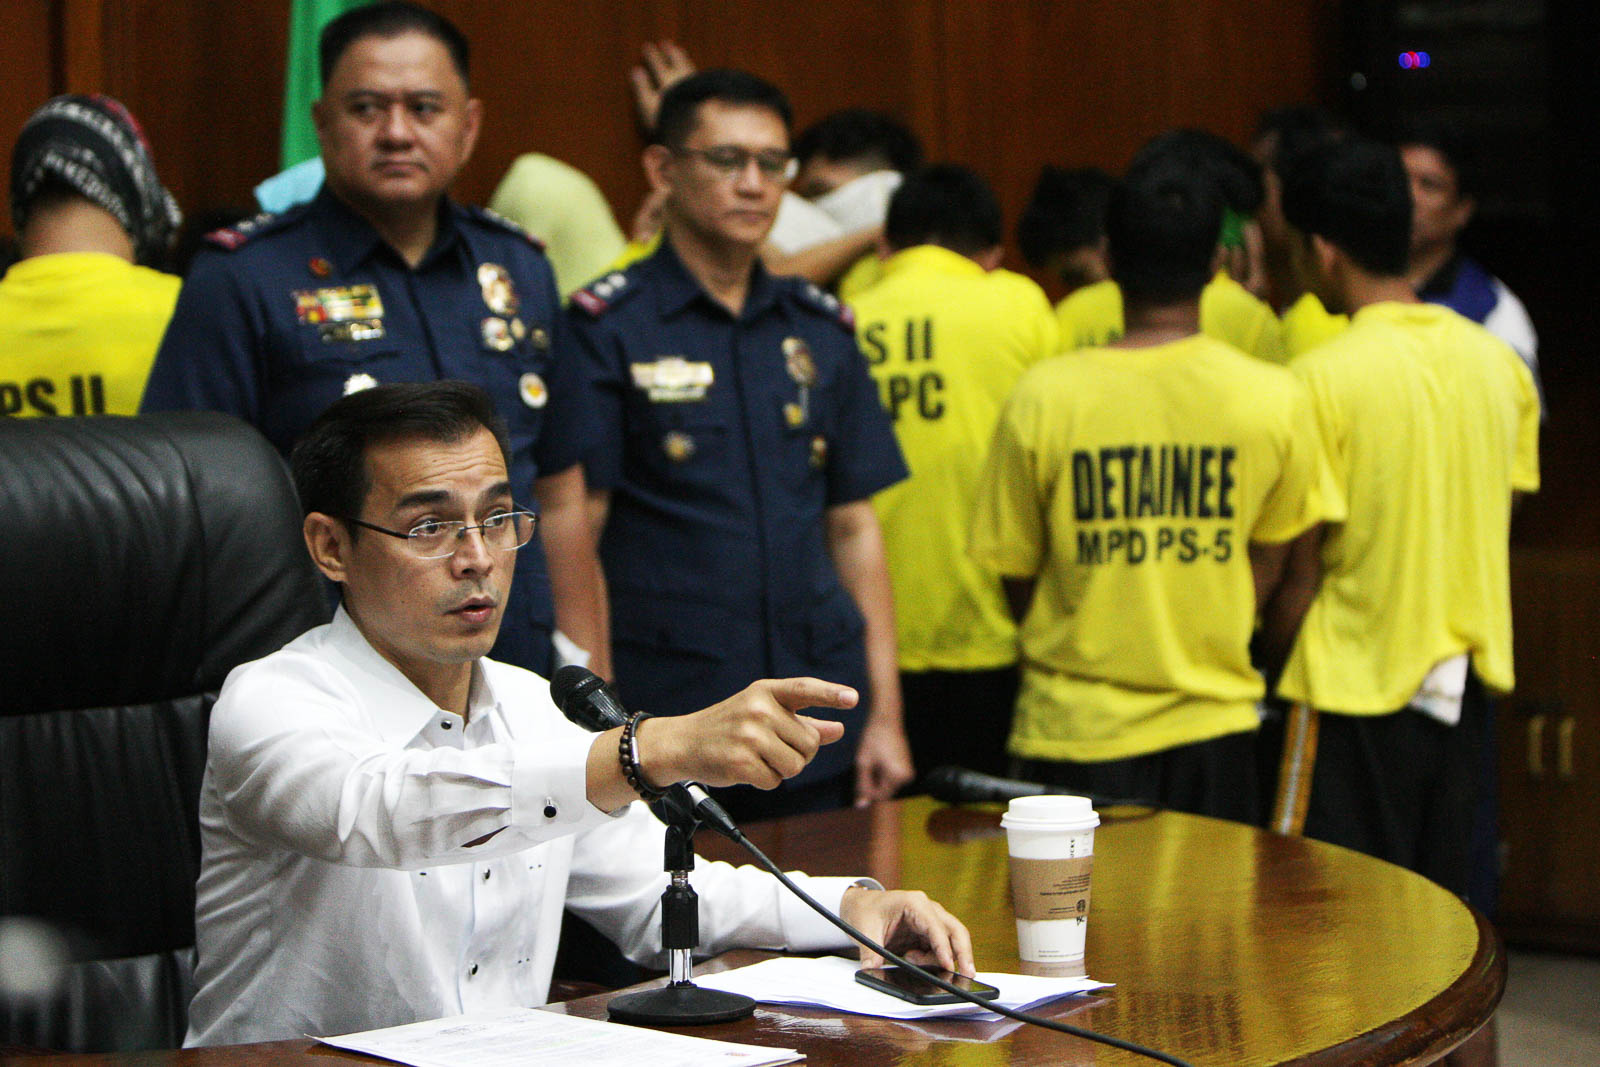 PRESENTATION. Manila Mayor Isko Moreno presents 35 drug personalities apprehended in a series of drug stings by members of the Manila Police District during a press conference at the Manila City hall after the morning flag raising ceremony on August 5, 2019. Photo by Ben Nabong/Rappler 